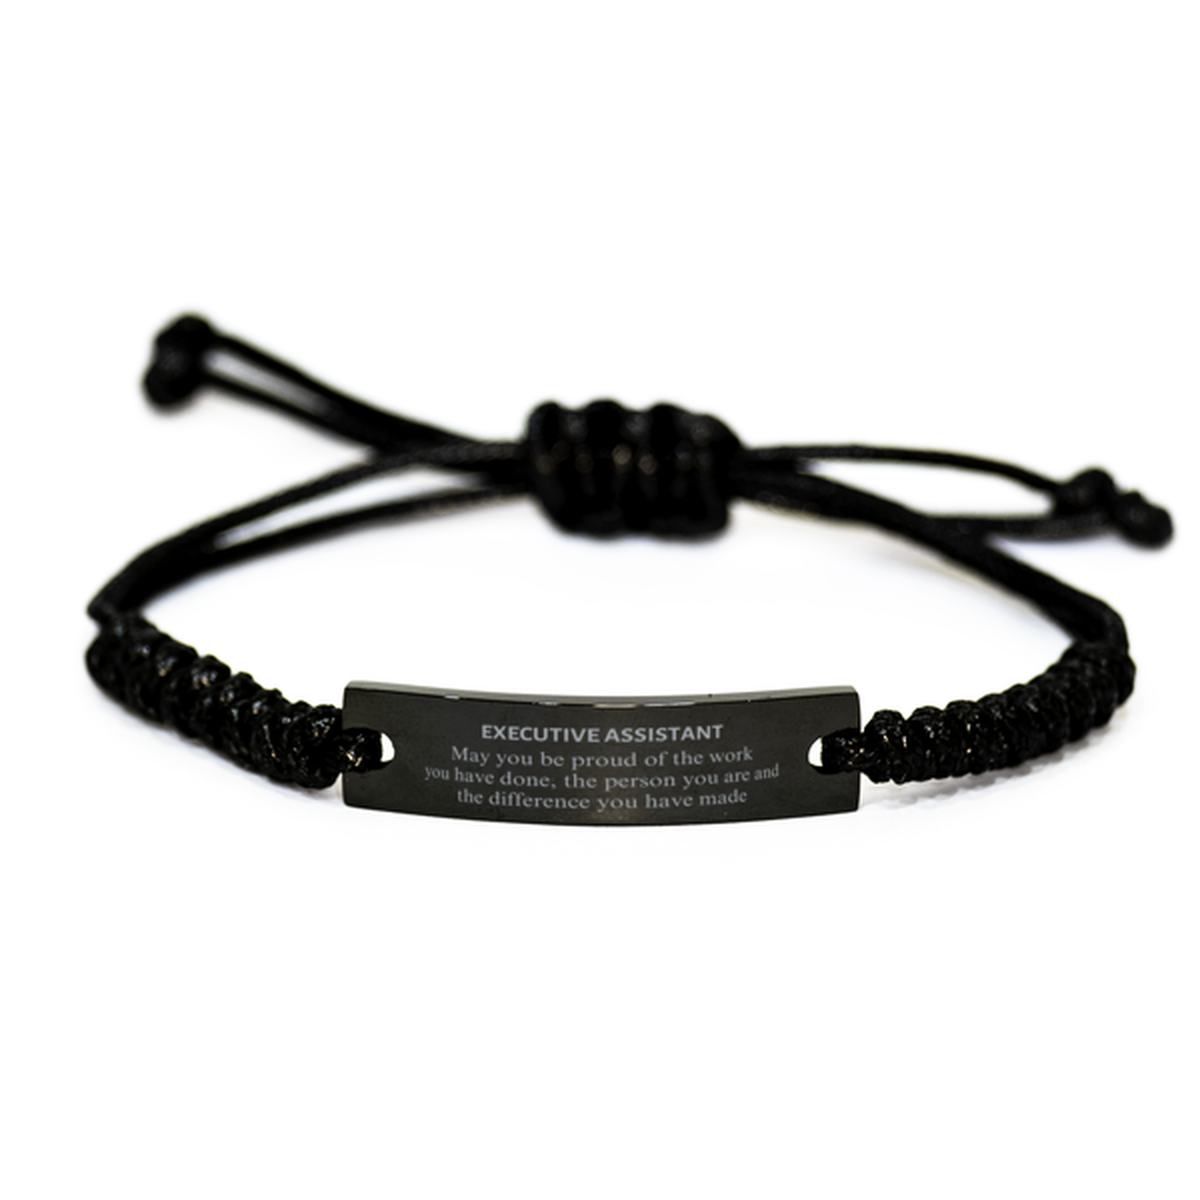 Executive Assistant May you be proud of the work you have done, Retirement Executive Assistant Black Rope Bracelet for Colleague Appreciation Gifts Amazing for Executive Assistant